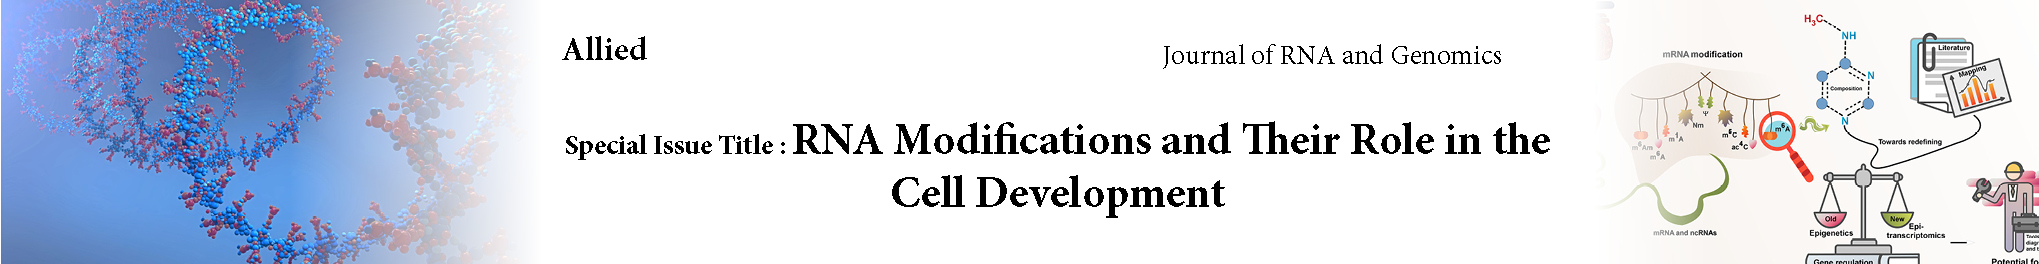 313-rna-modifications-and-their-role-in-the-cell-development.jpg